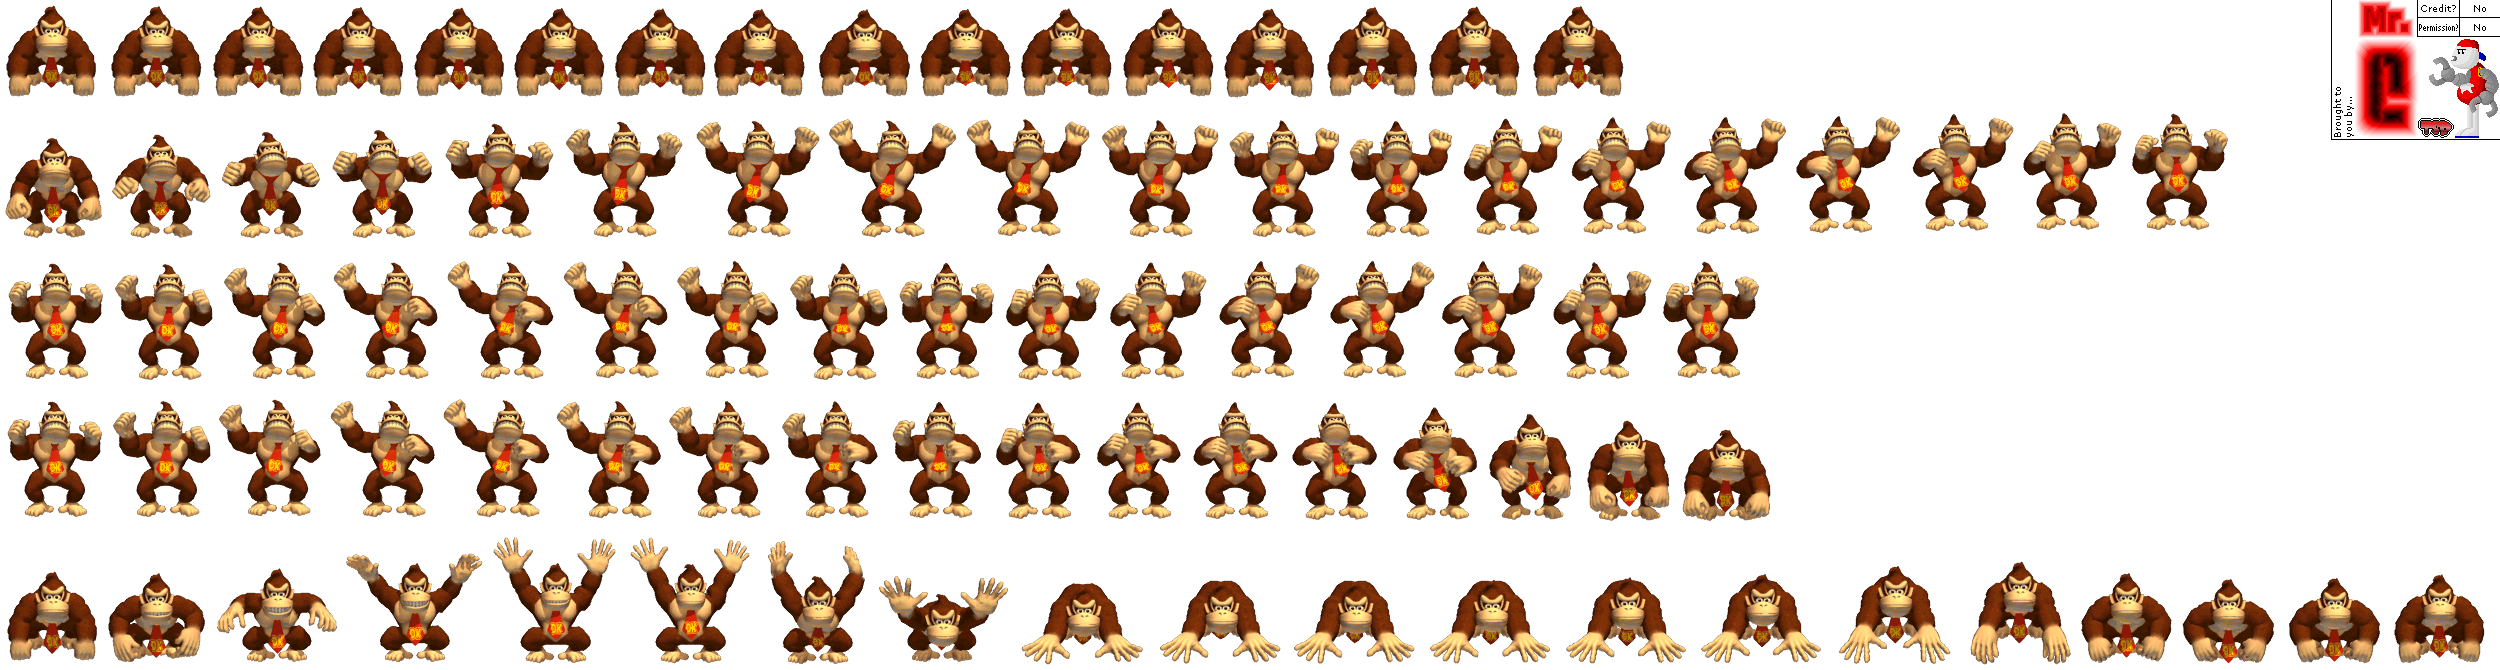 Click For Full Sized Image Donkey Kong - Donkey Kong Sprite Png (2500x670), Png Download